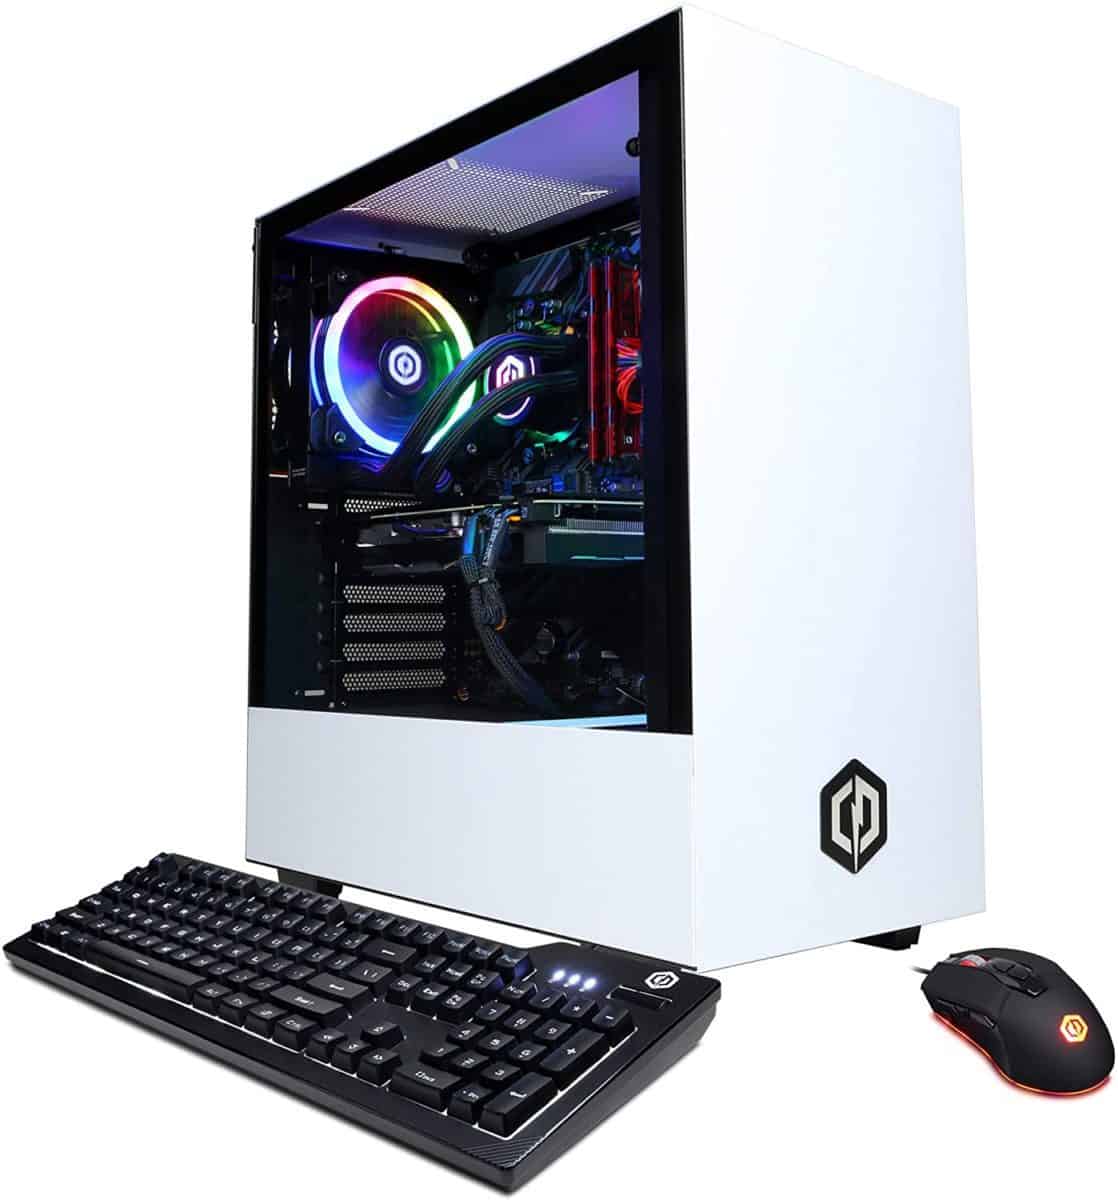  Best Prebuilt Gaming Pc Amazon for Small Room